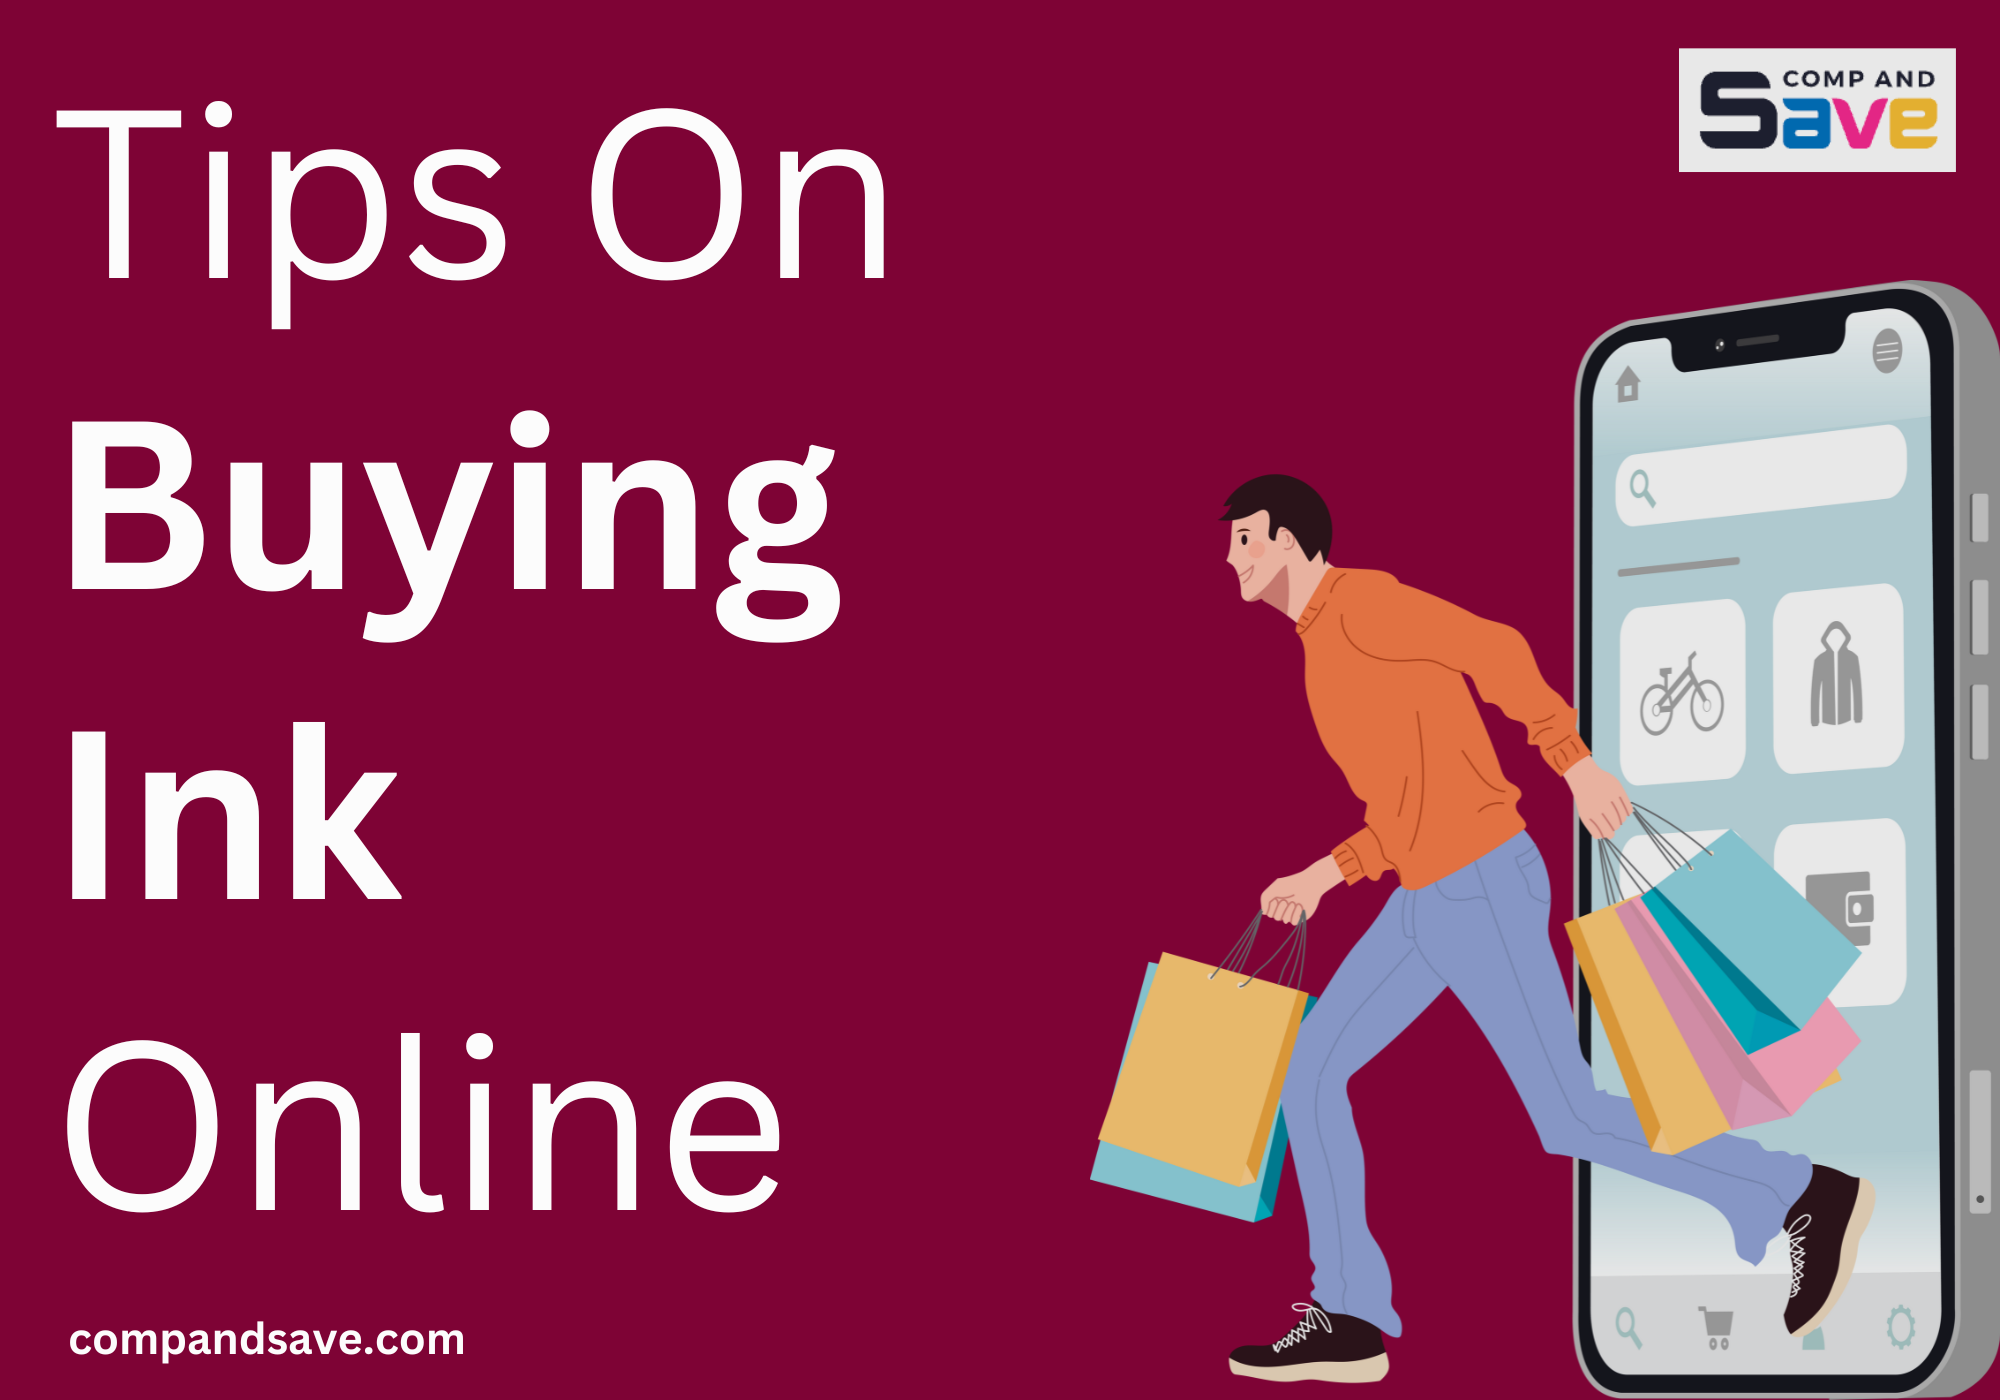 image from Buying Ink Online: Top Tips and 5 Common Mistakes to Avoid